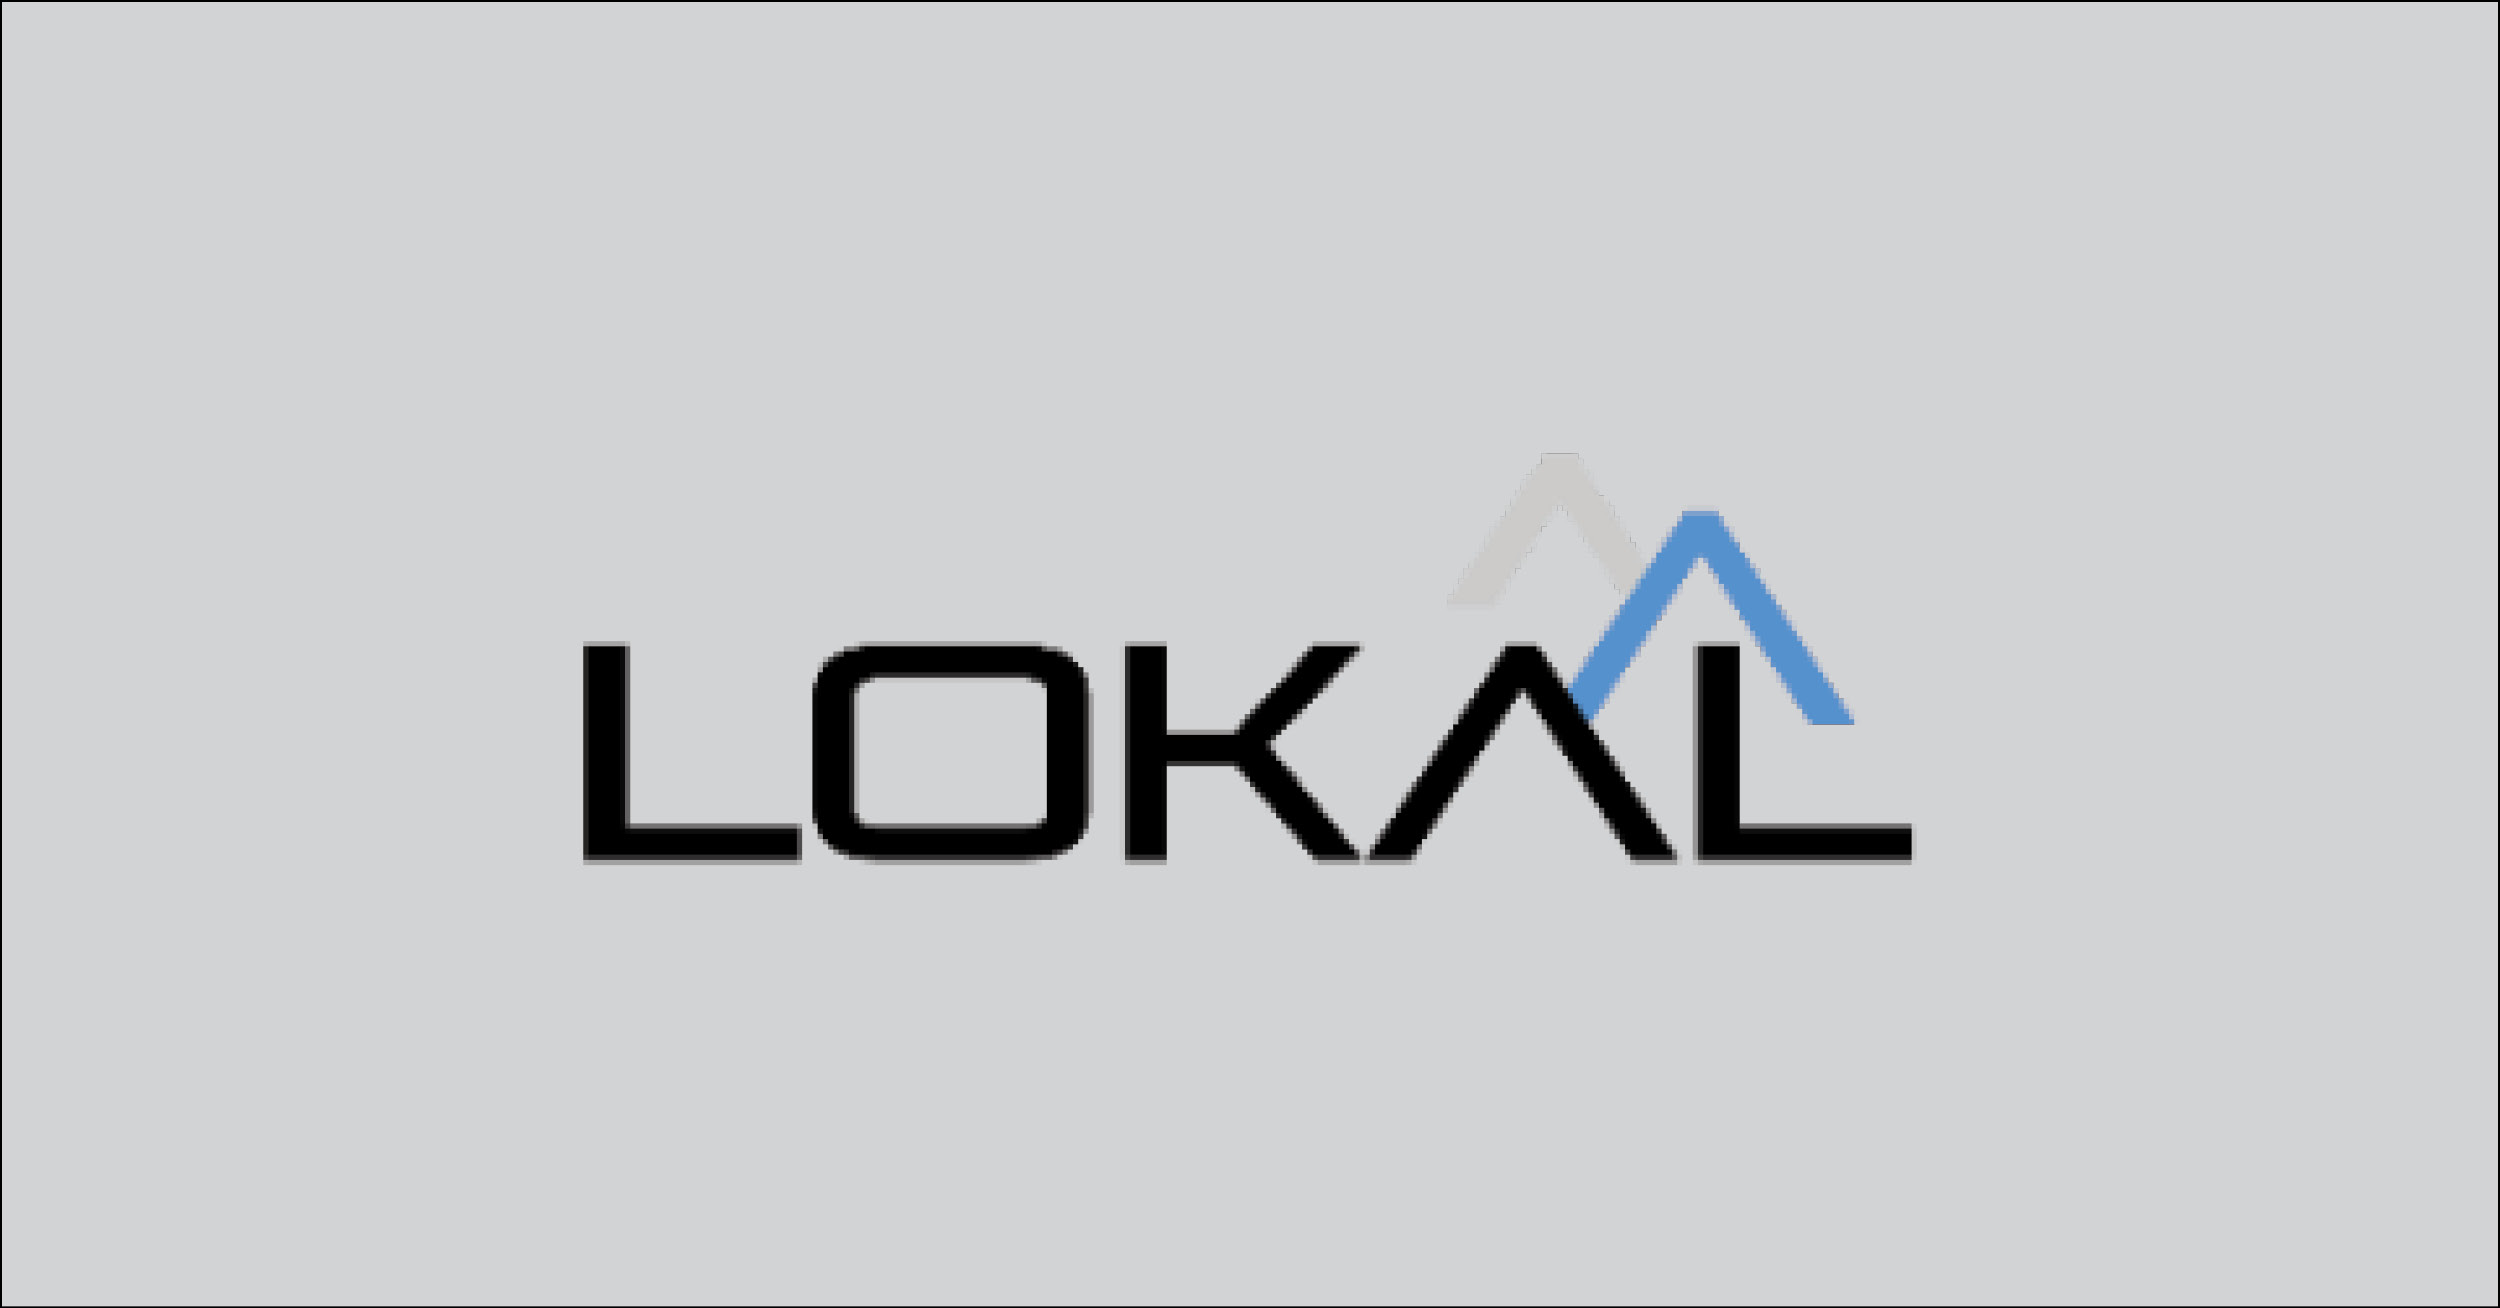 Find new construction or search for new homes and communities by Lokal Homes in Colorado